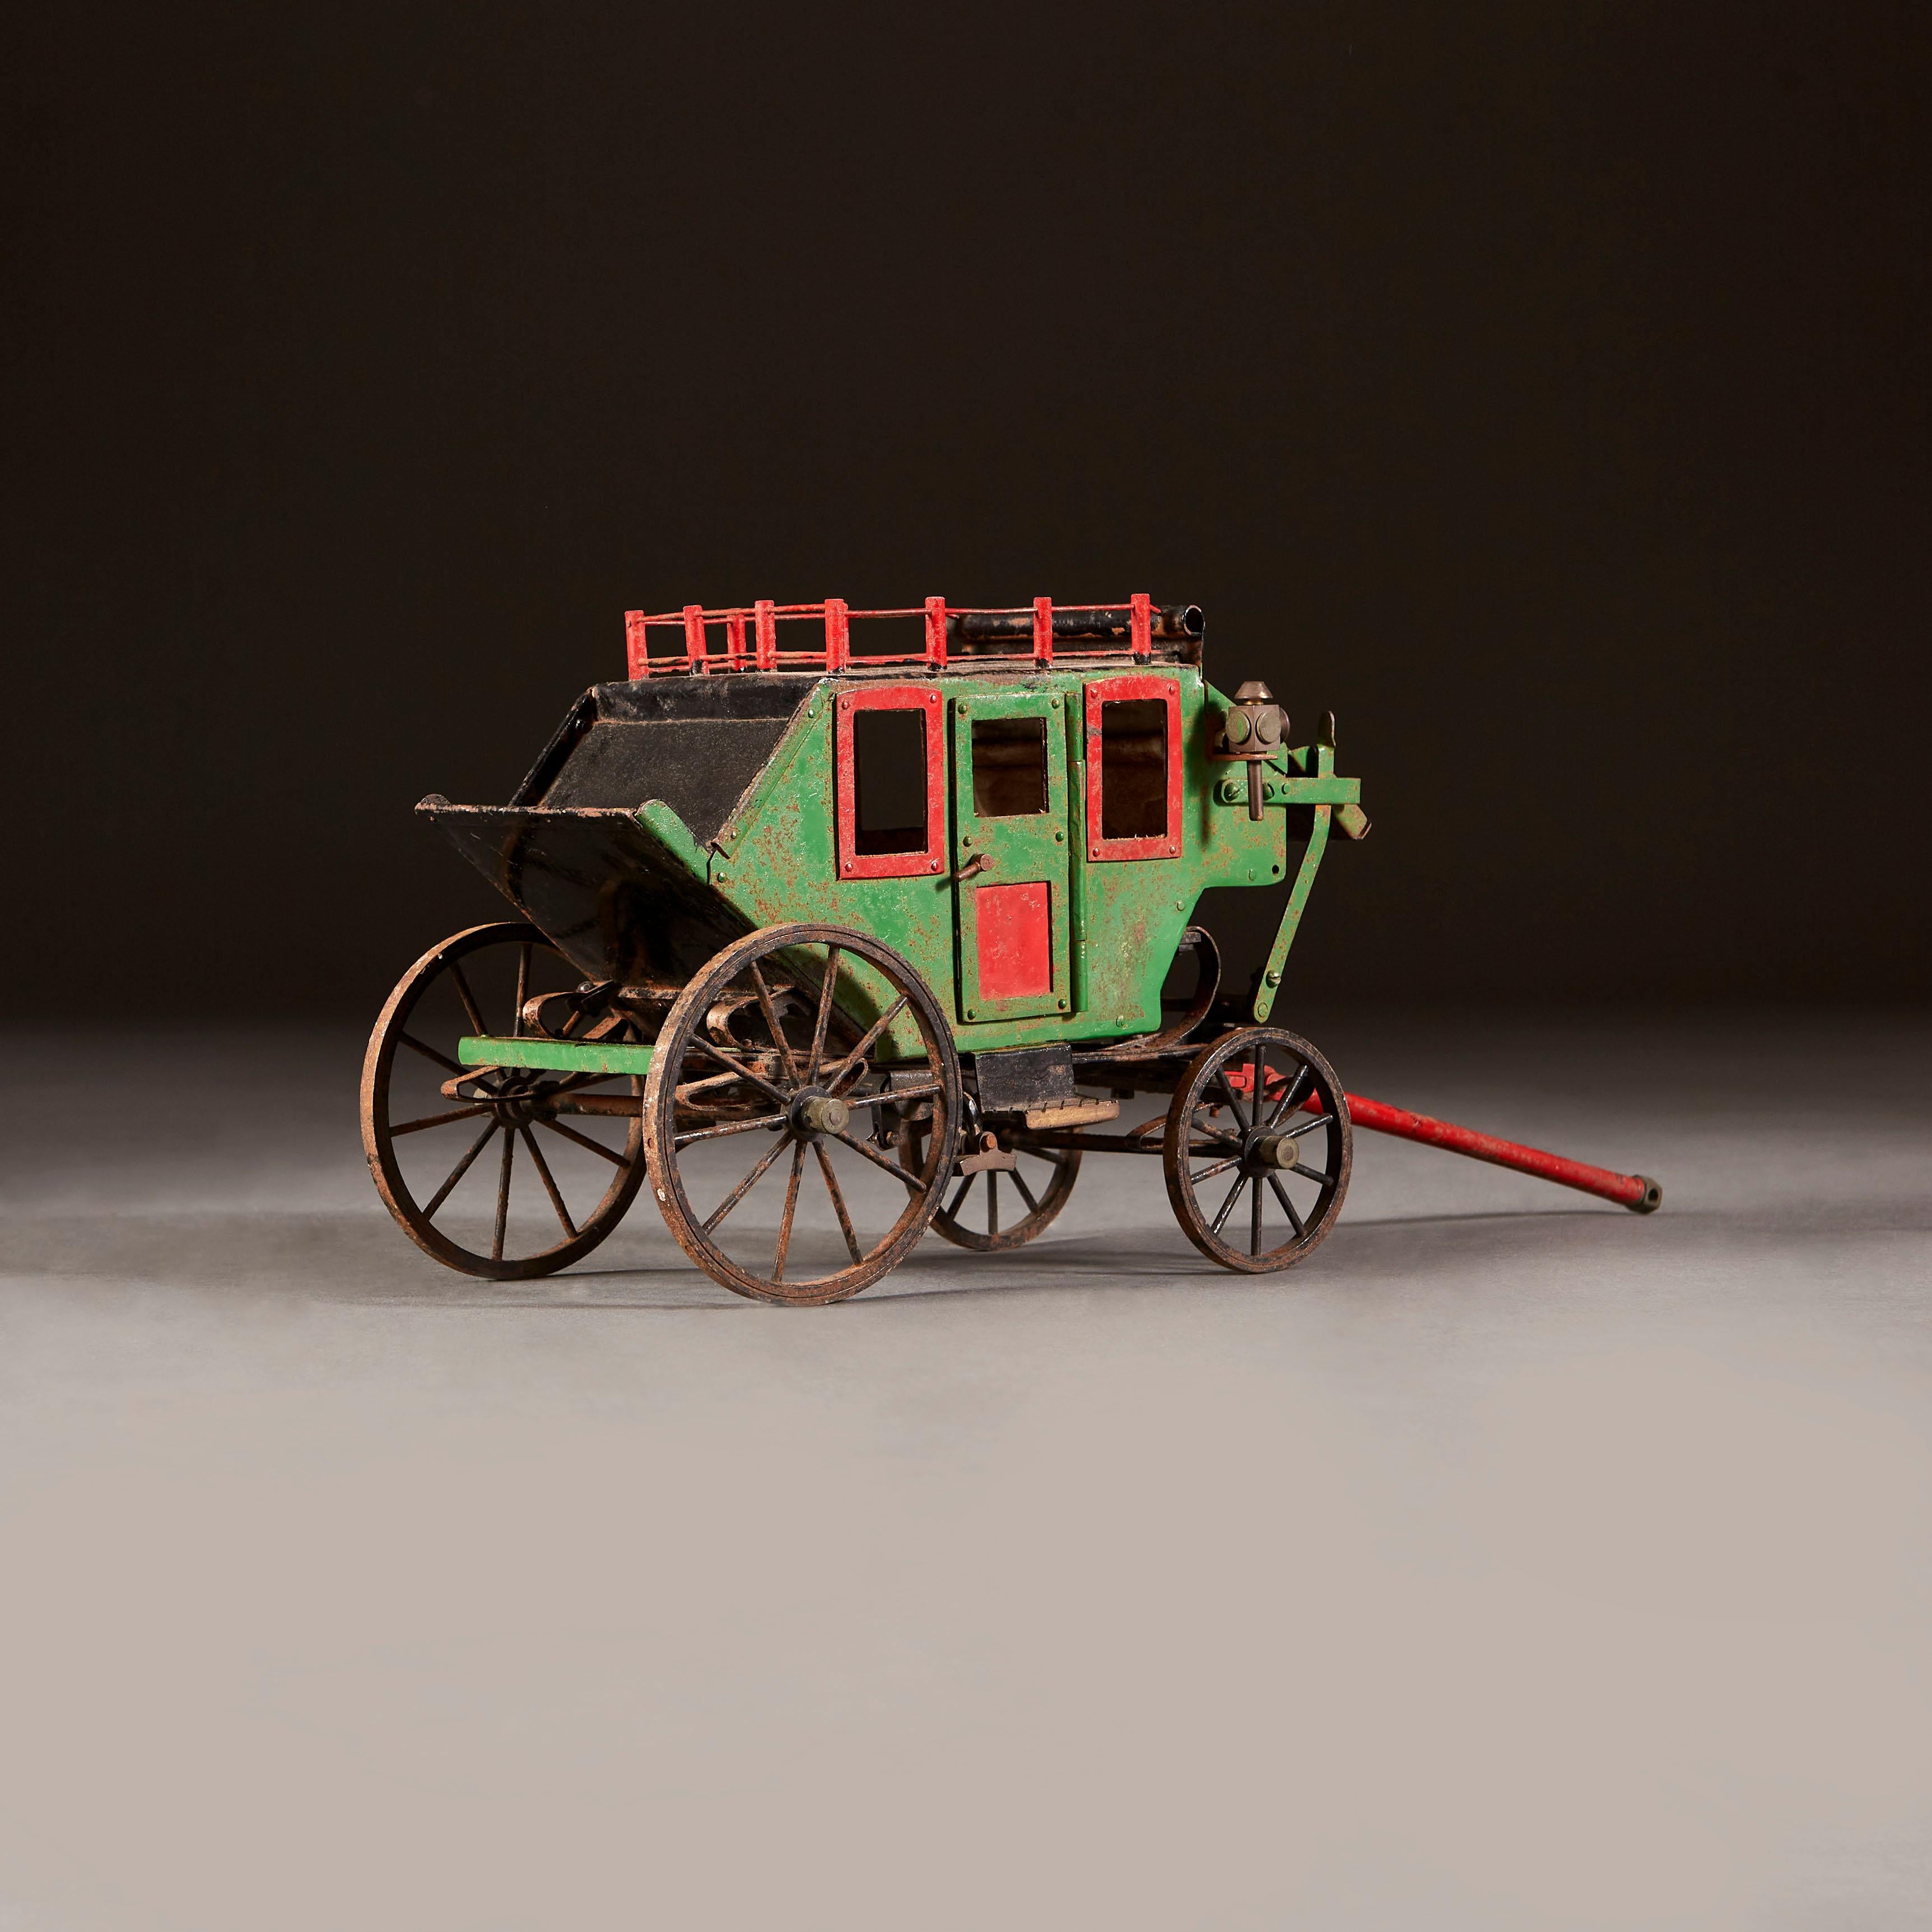 An early twentieth century folk art model of an American stage coach, with red balustrading and door frame and panels, the body painted in green. With tethering rod.